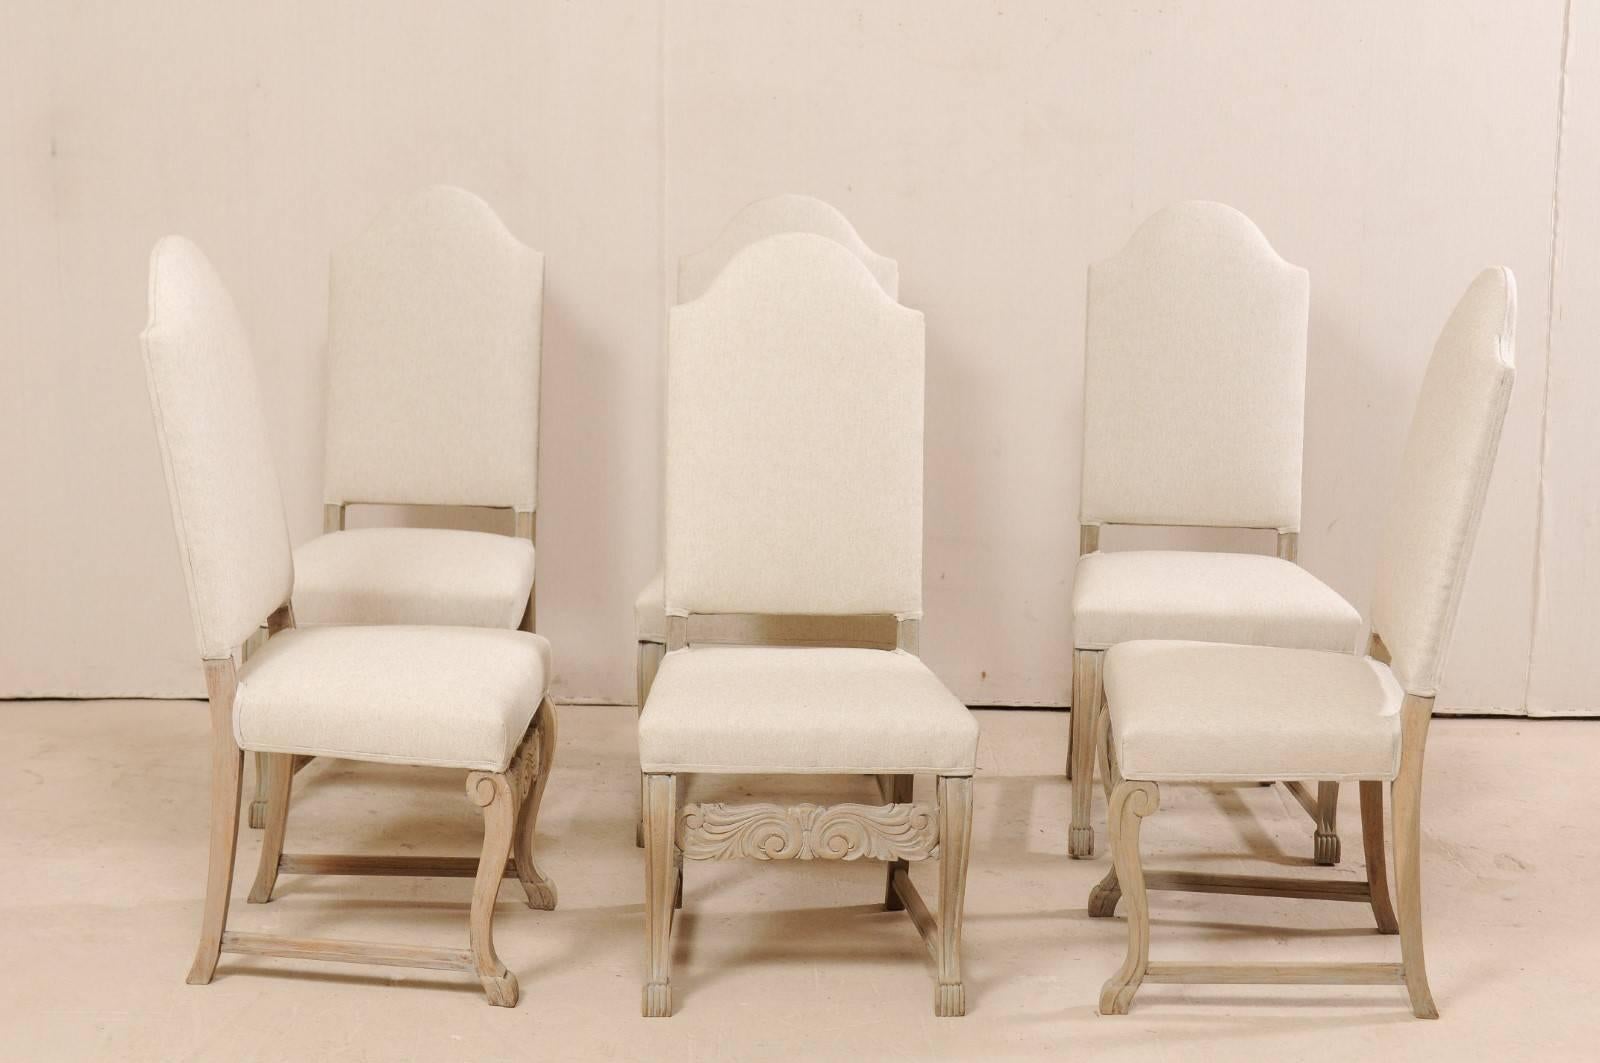 Carved A Swedish Set of 6 Upholstered & Wood Dining Side Chairs w/Arched Top-rail Backs